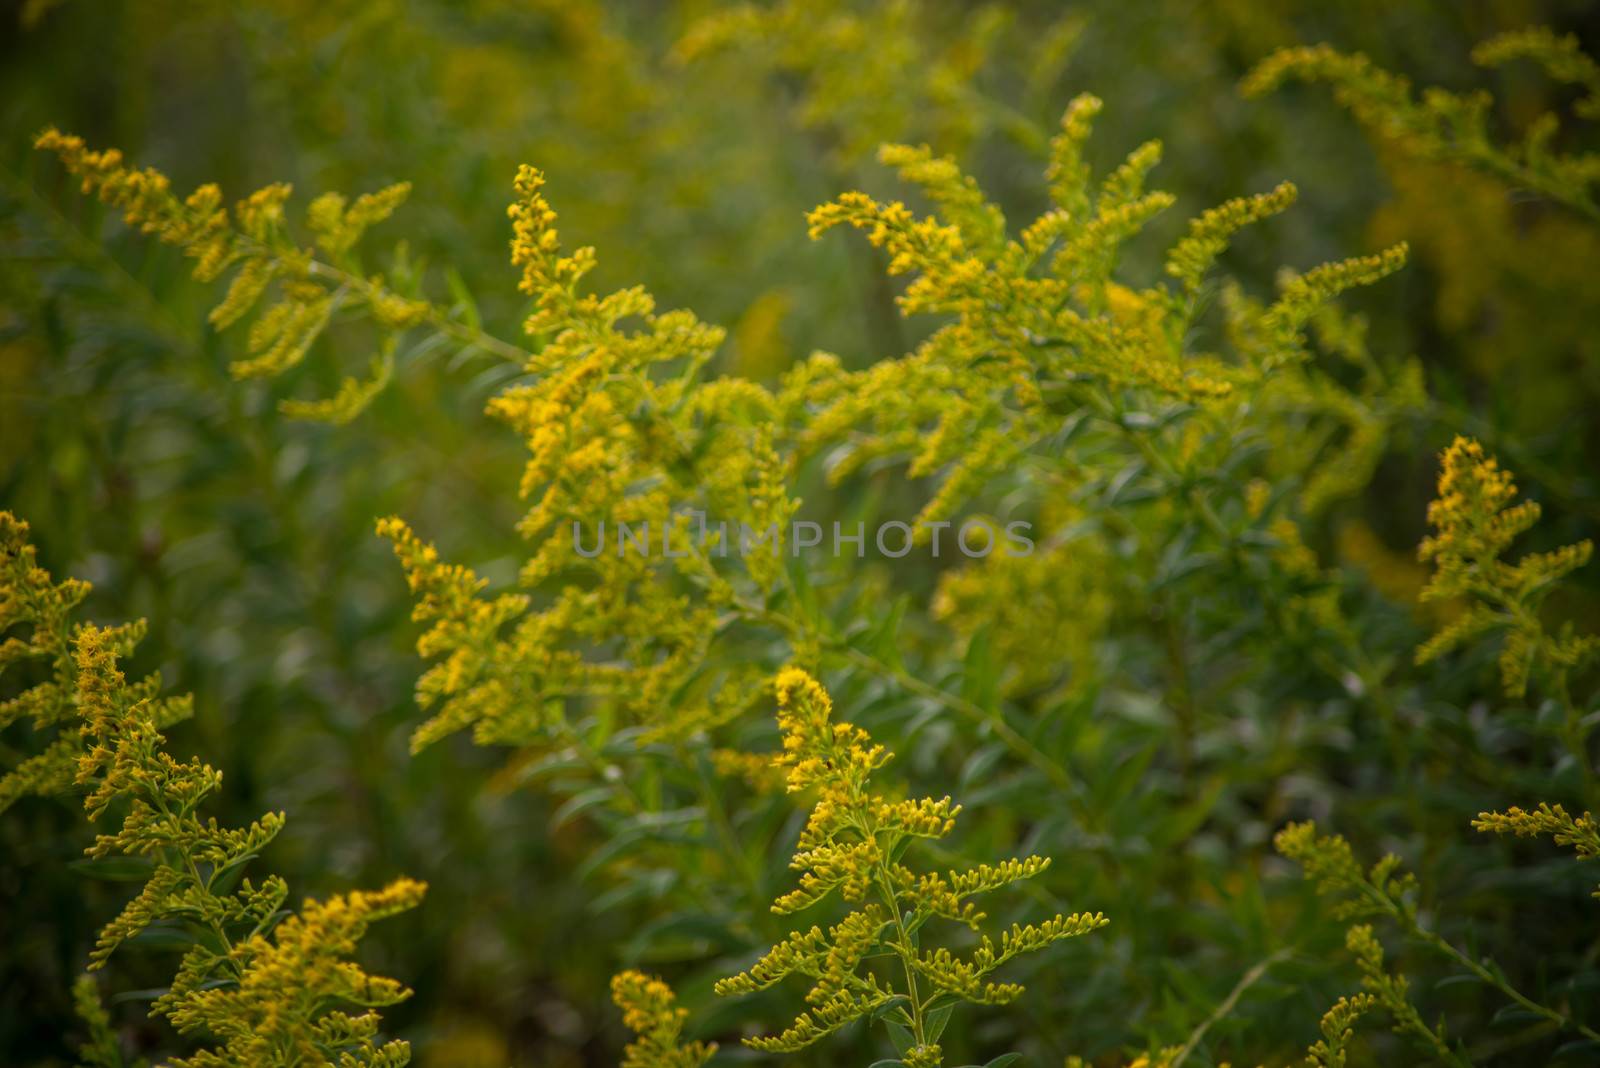 Goldenrods sweep across the frame in this abstract floral backgr by marysalen